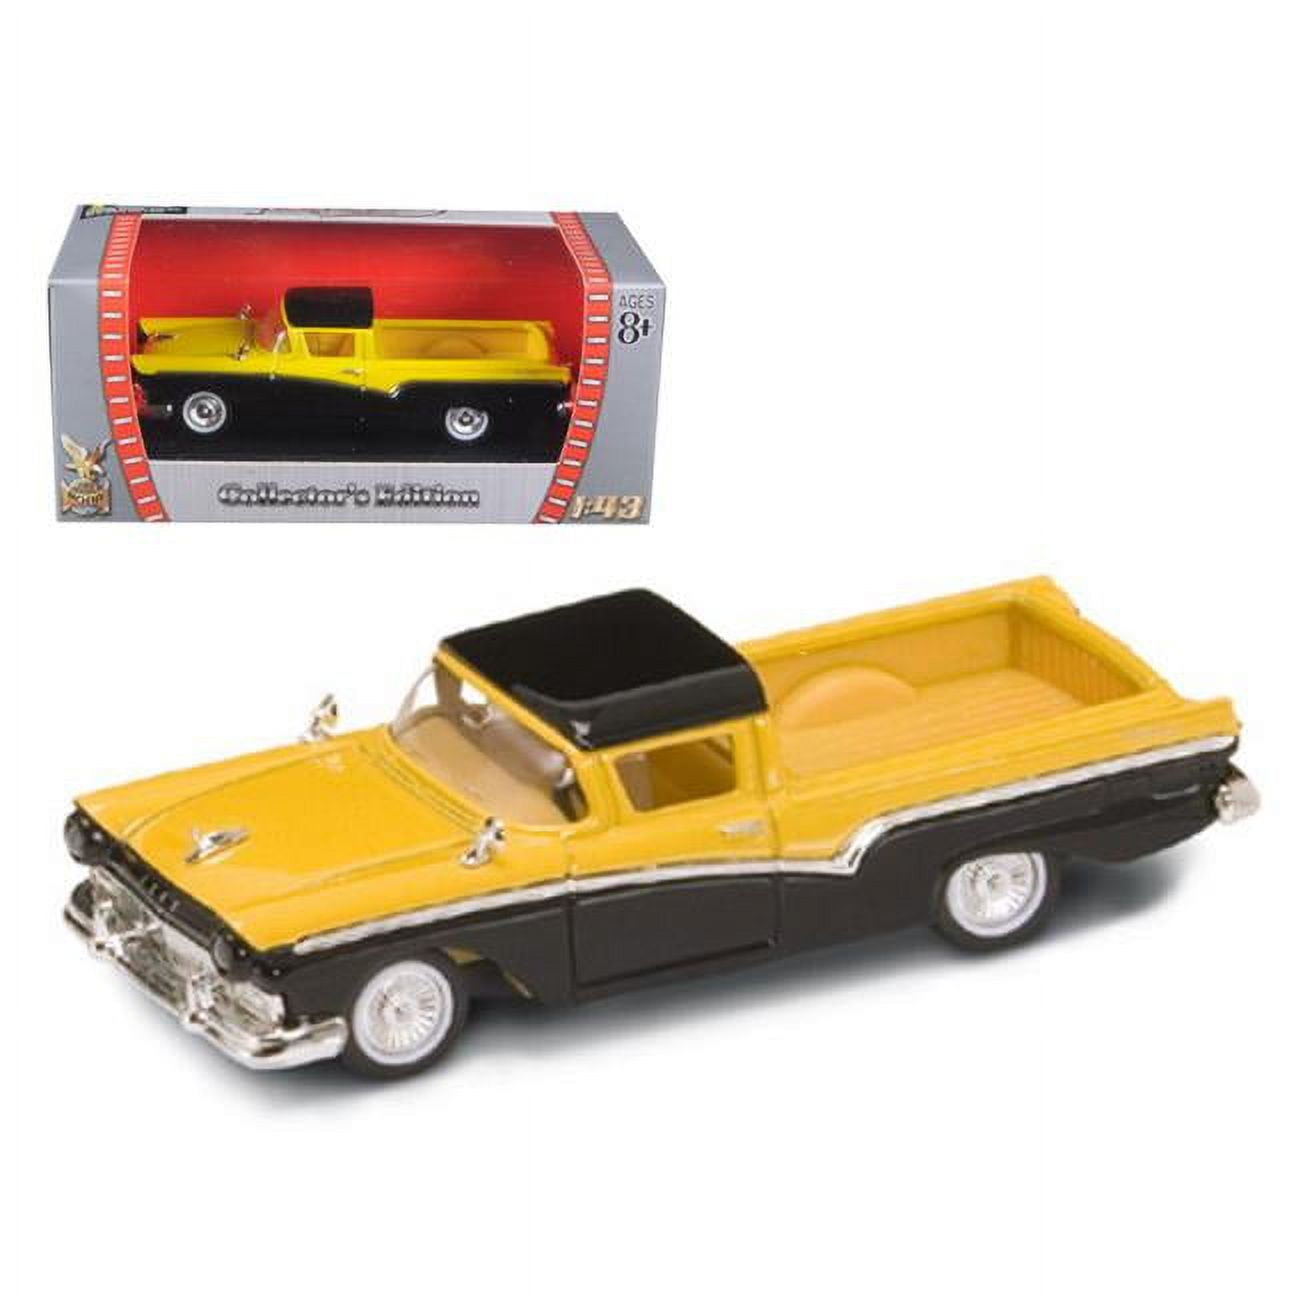 94215y 1 by 43 1957 Ford Ranchero Diecast Model Car, Yellow & Black -  ROAD SIGNATURE